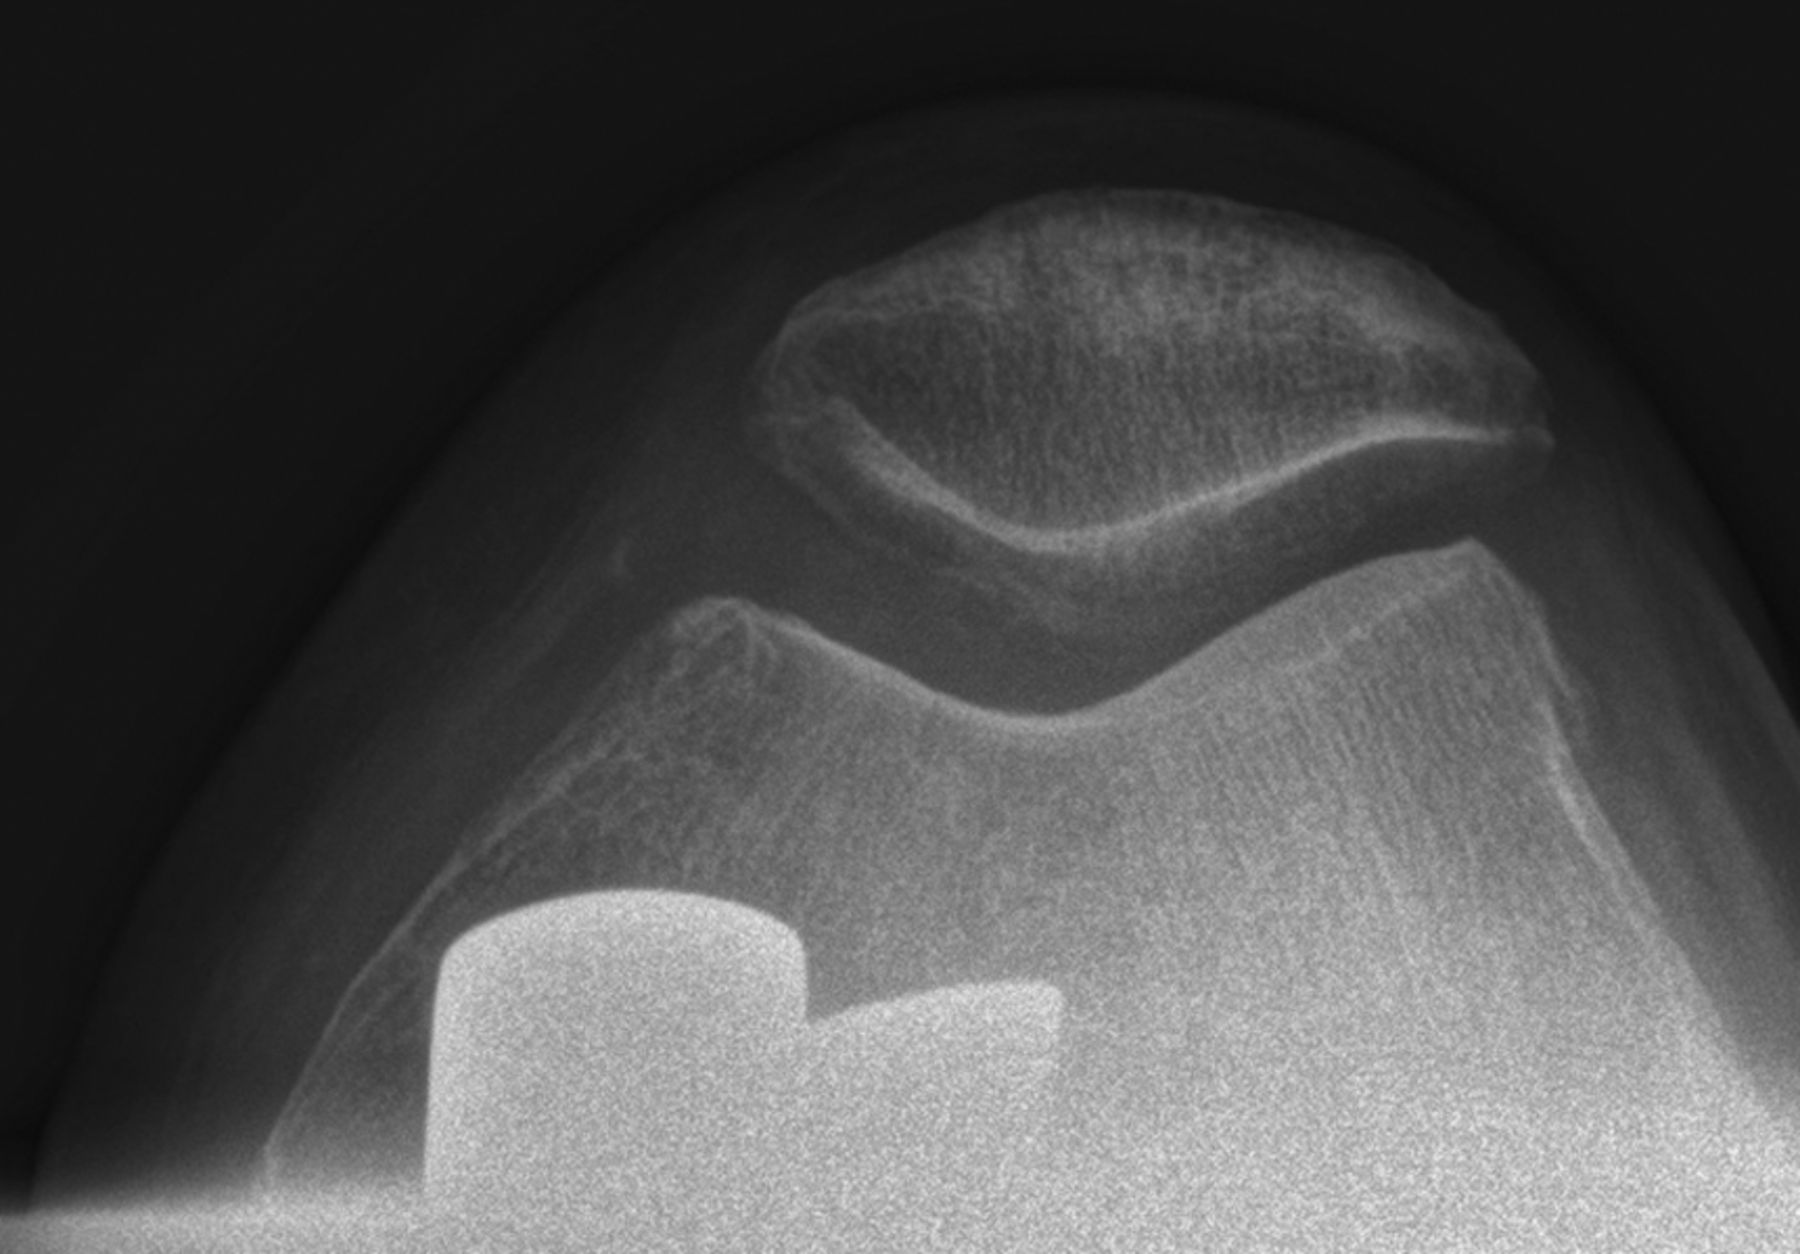 Fig. 2 
          Post-operative radiograph lateral chondral
lesion in the patellofemoral joint that was treated with a medial
unicompartmental arthroplasty at latest follow-up.
        